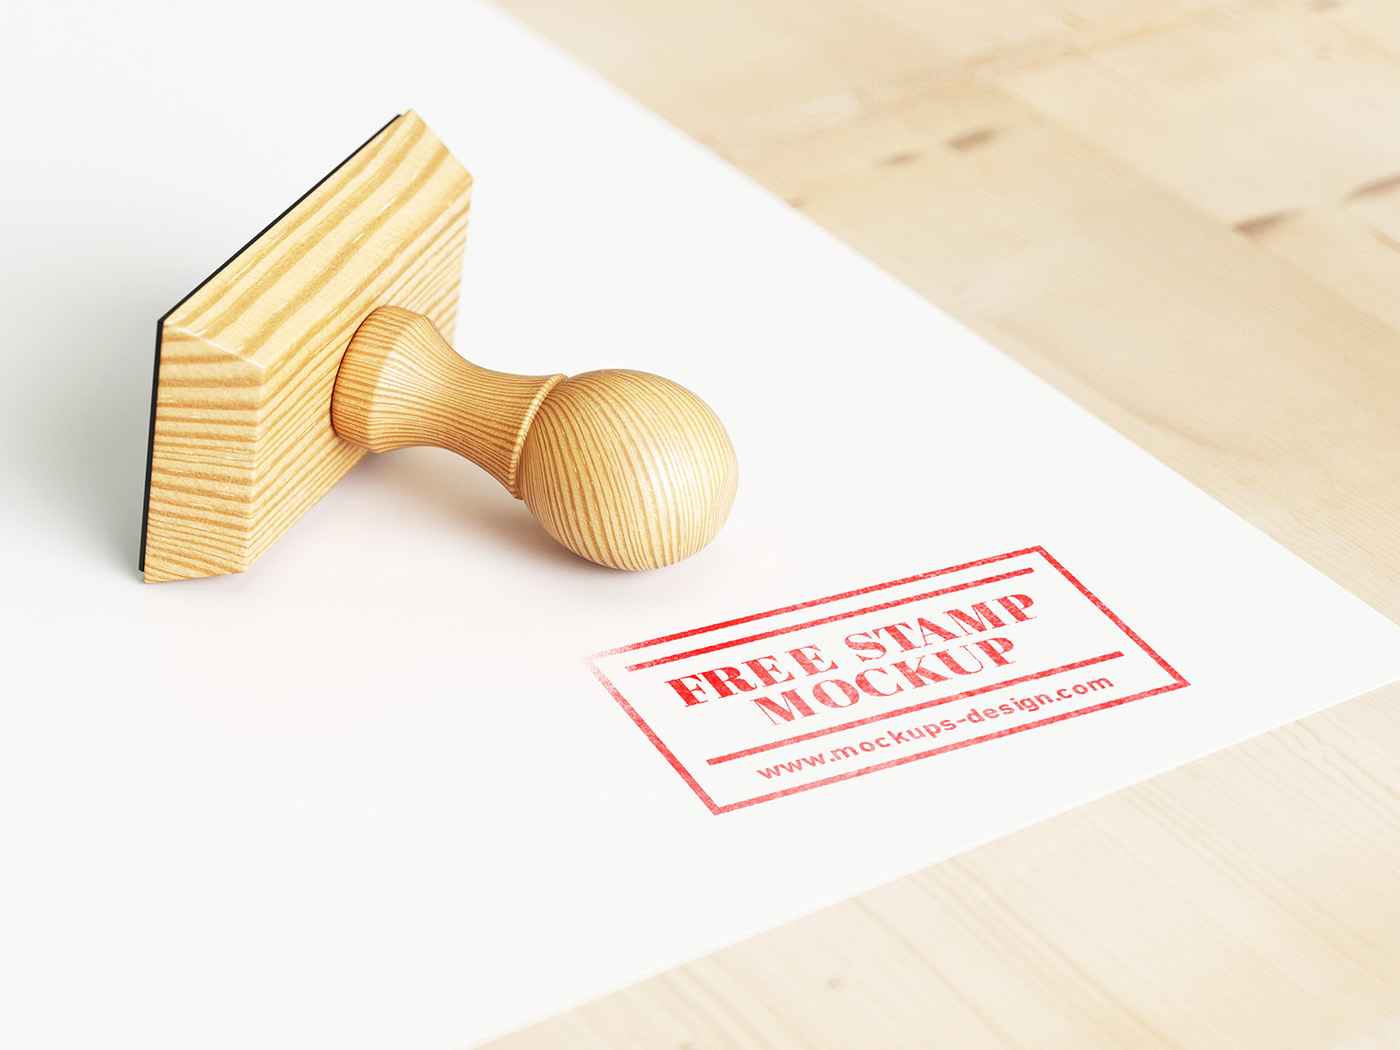 A free wooden stamp mockup template